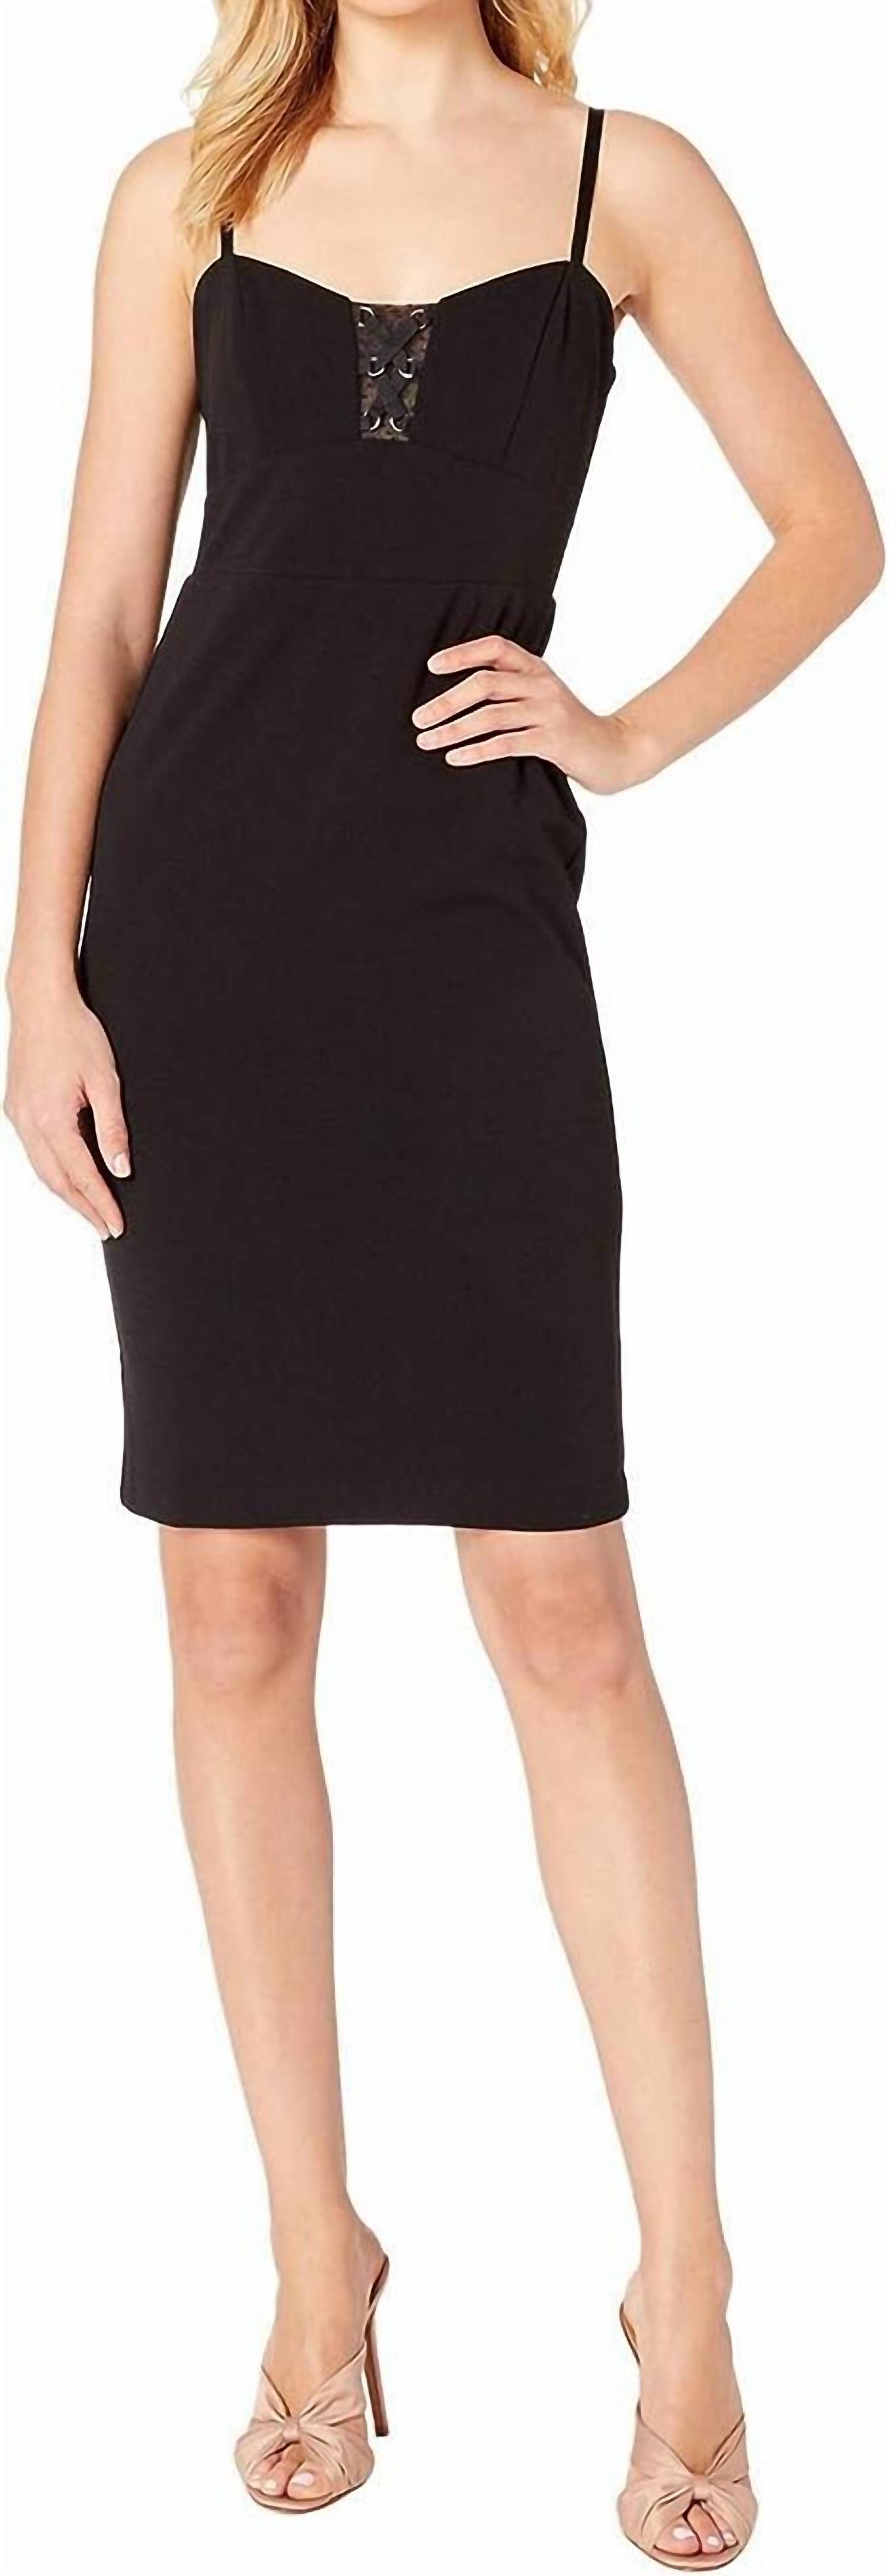 Bebe Illusions Cut Out Lace Up Sheath Dress In Black